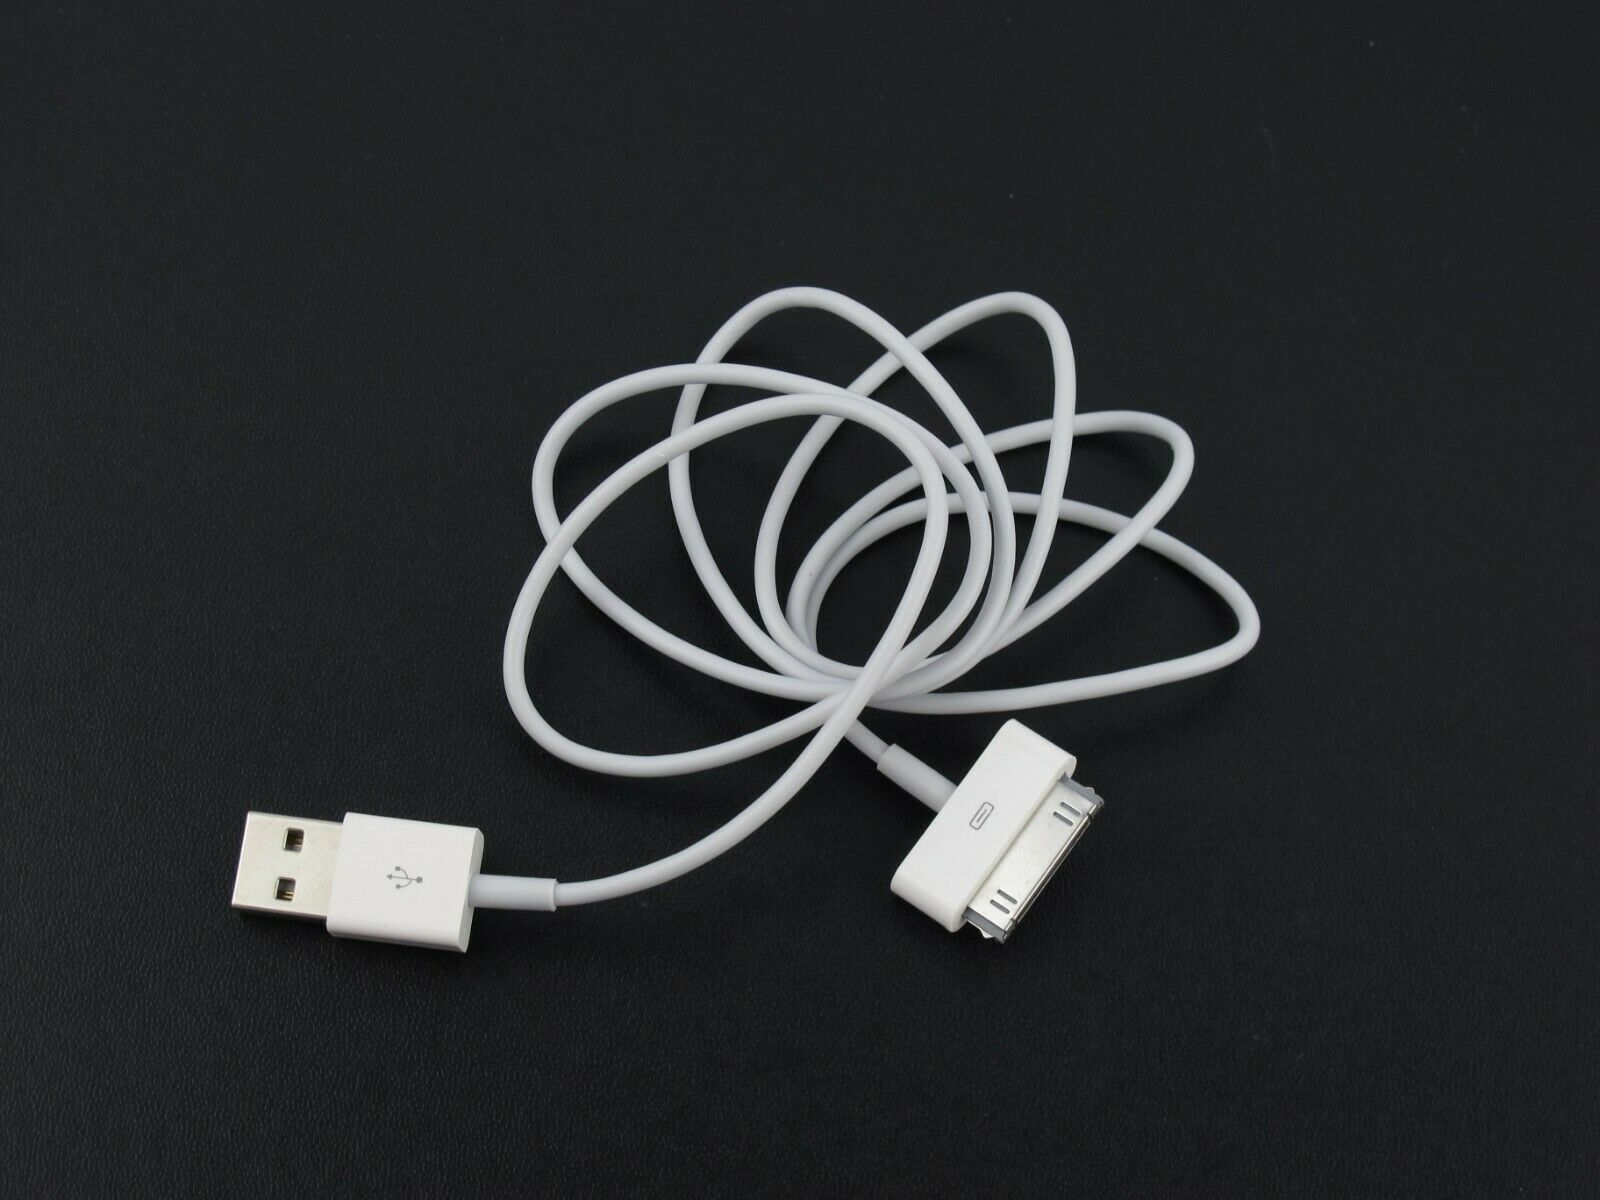 New Usb Charger Cable For Ipad Tab Table 1 2 3 1st 2nd 3rd Generation